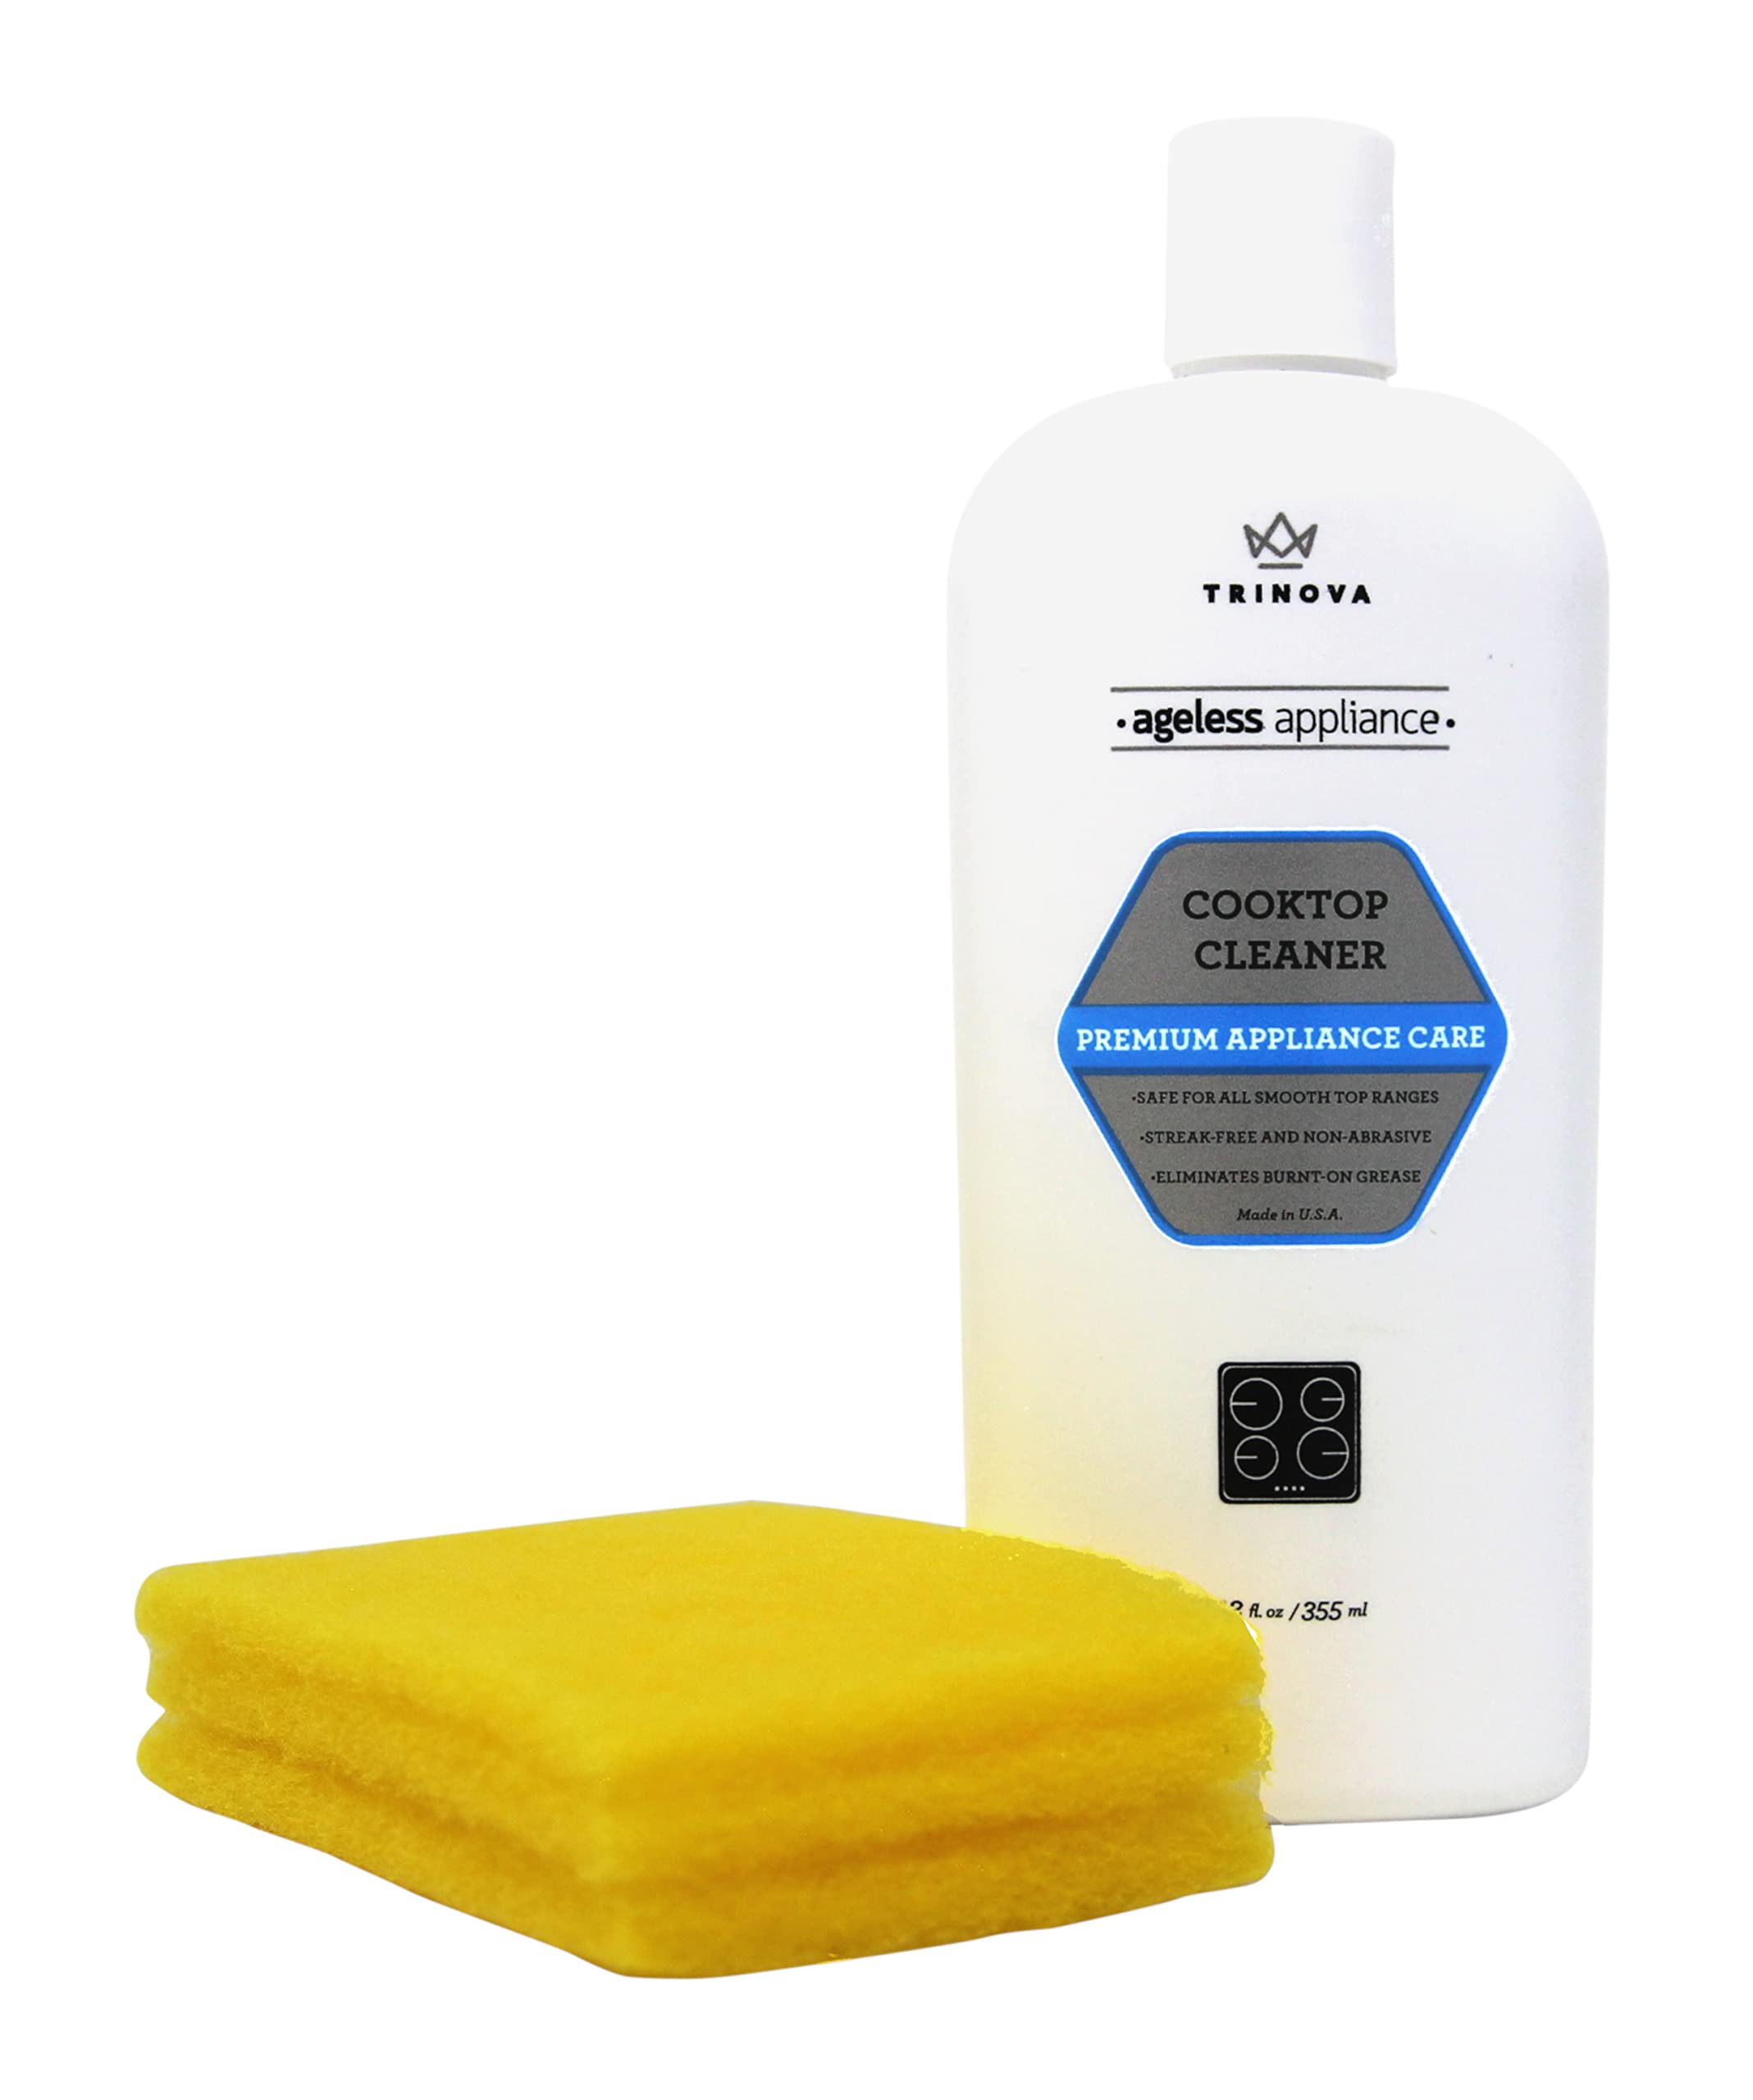 Book Cover TriNova Premium Cooktop Cleaner and Scrubbing Pads. Best Cleaning Kit for Smooth Top Ranges & Stoves of Glass, Ceramic. Non-Abrasive and Scratch Free scouring sponges with Cream Formula 12oz.